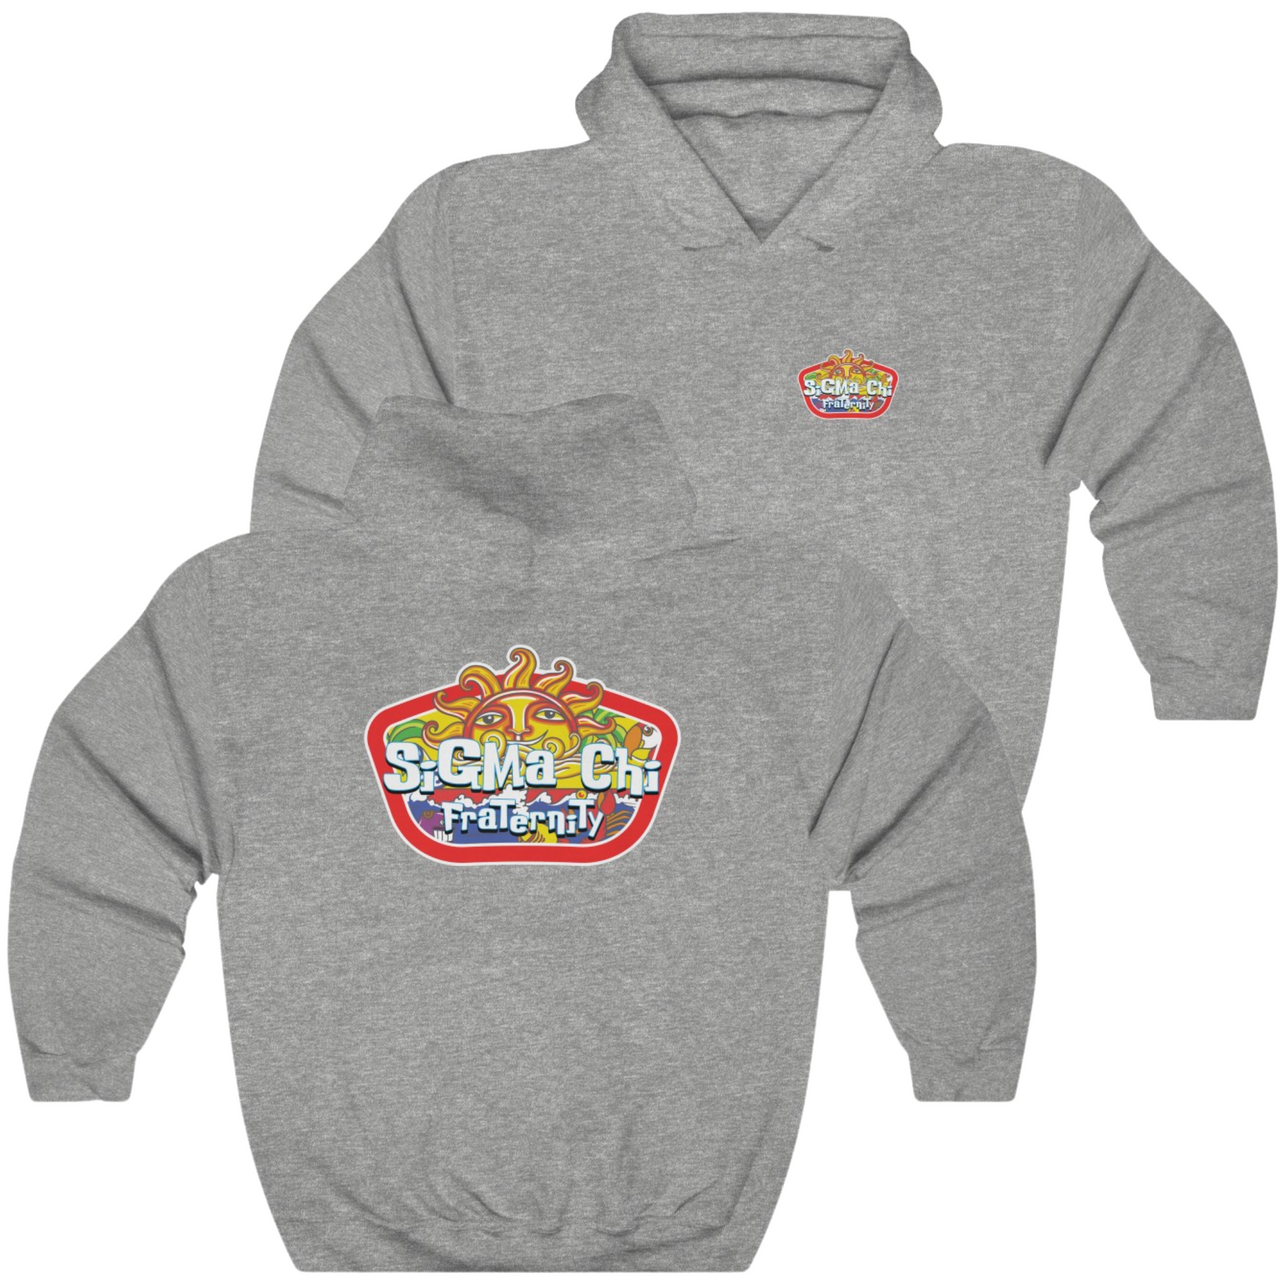 Grey Sigma Chi Graphic Hoodie | Summer Sol | Sigma Chi Fraternity Merch House